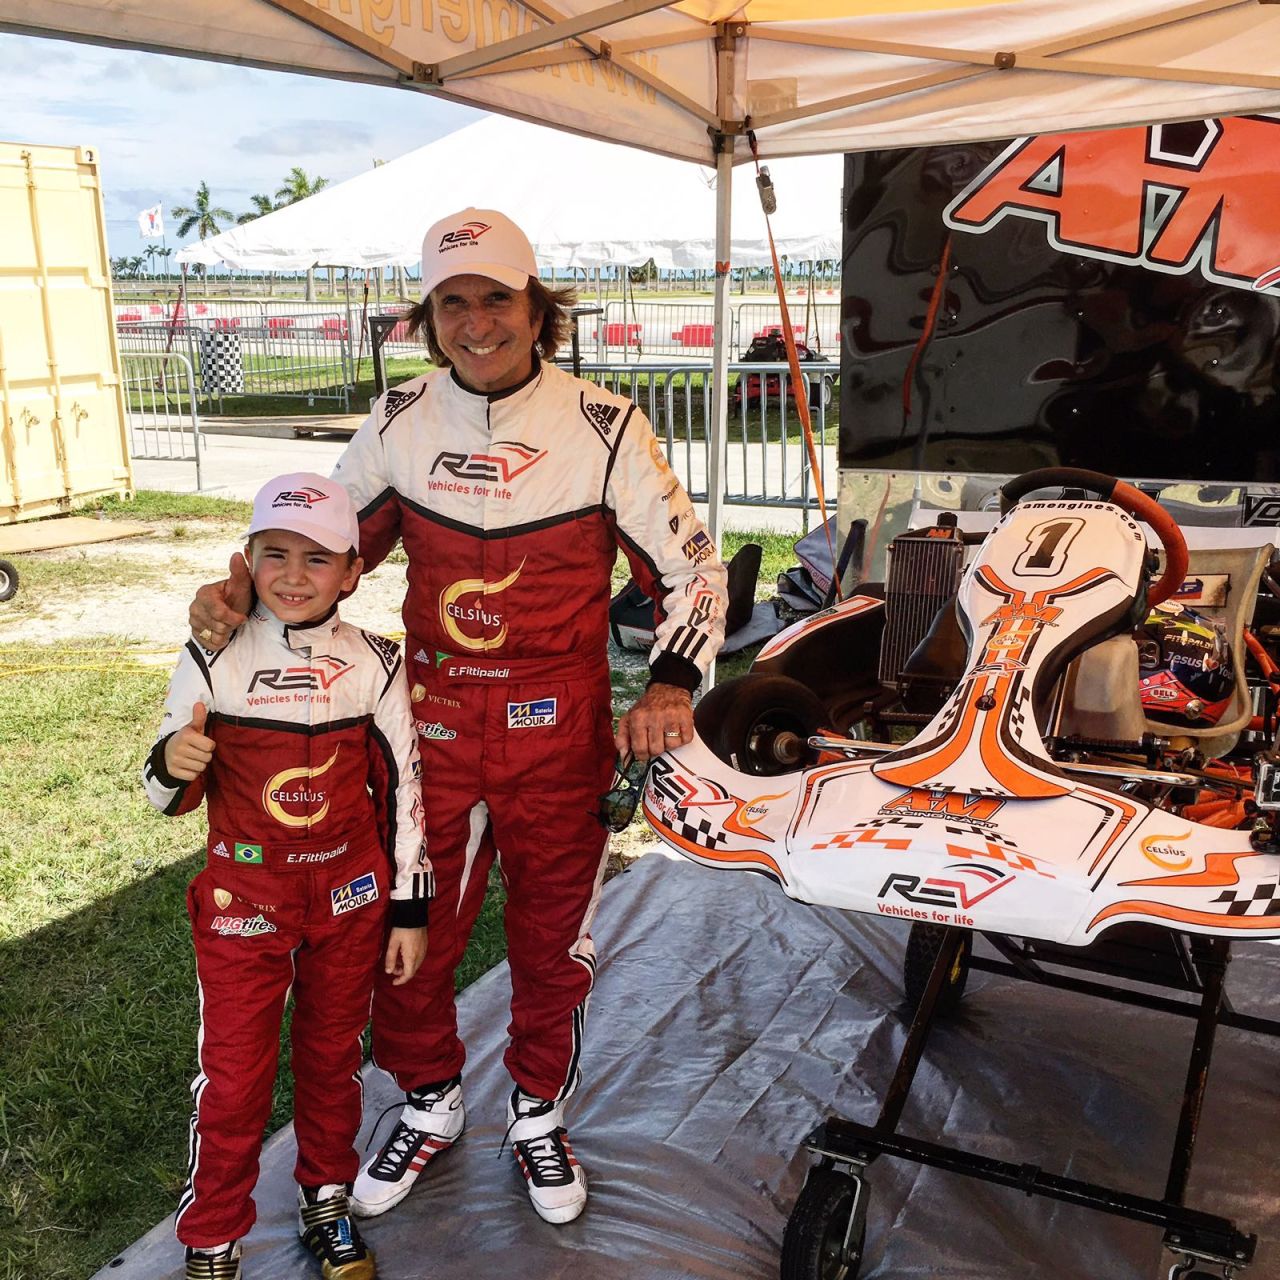 Could we see another Emerson Fittipaldi in Formula One in the future? The double F1 world champion is helping his son "Little Emmo" start his own career in motorsport.